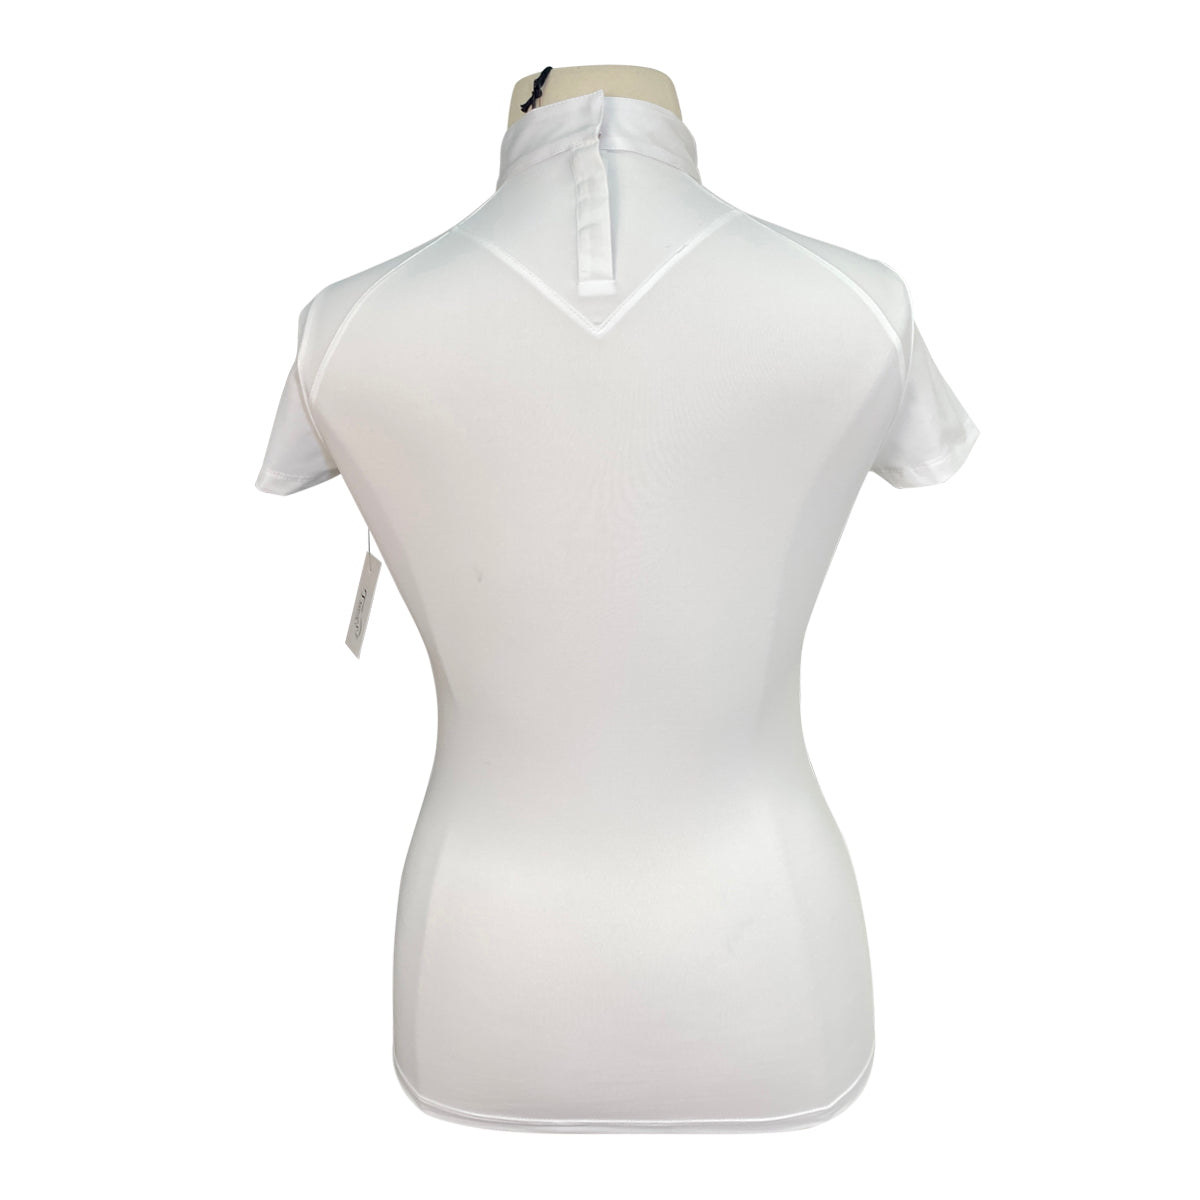 MakeBe 'Jane' Polo Show Shirt in White